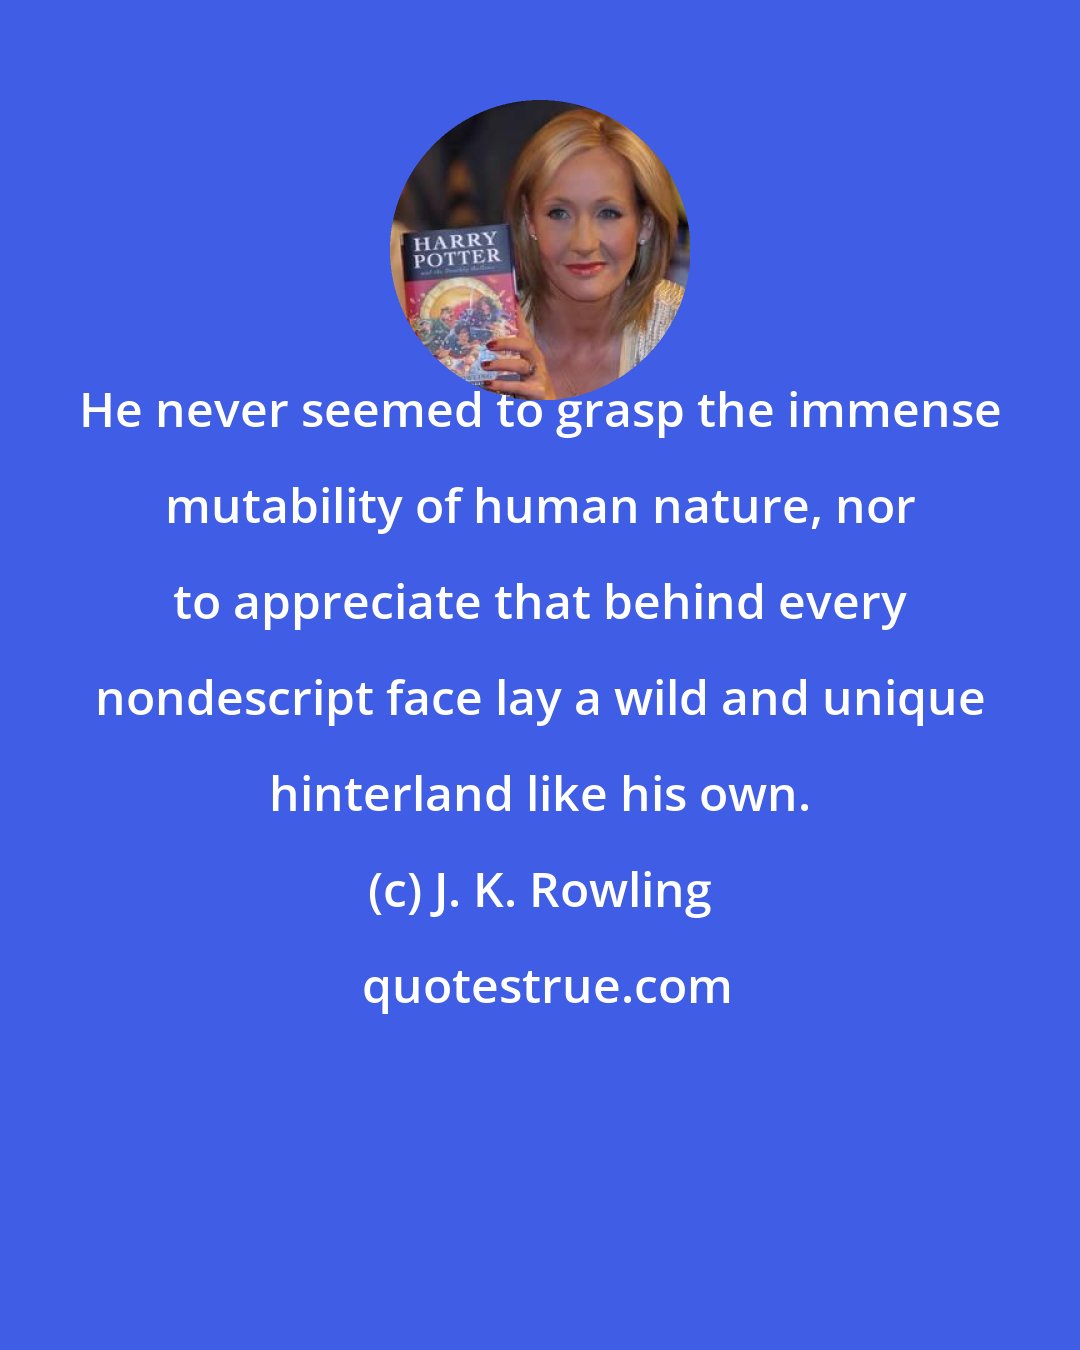 J. K. Rowling: He never seemed to grasp the immense mutability of human nature, nor to appreciate that behind every nondescript face lay a wild and unique hinterland like his own.